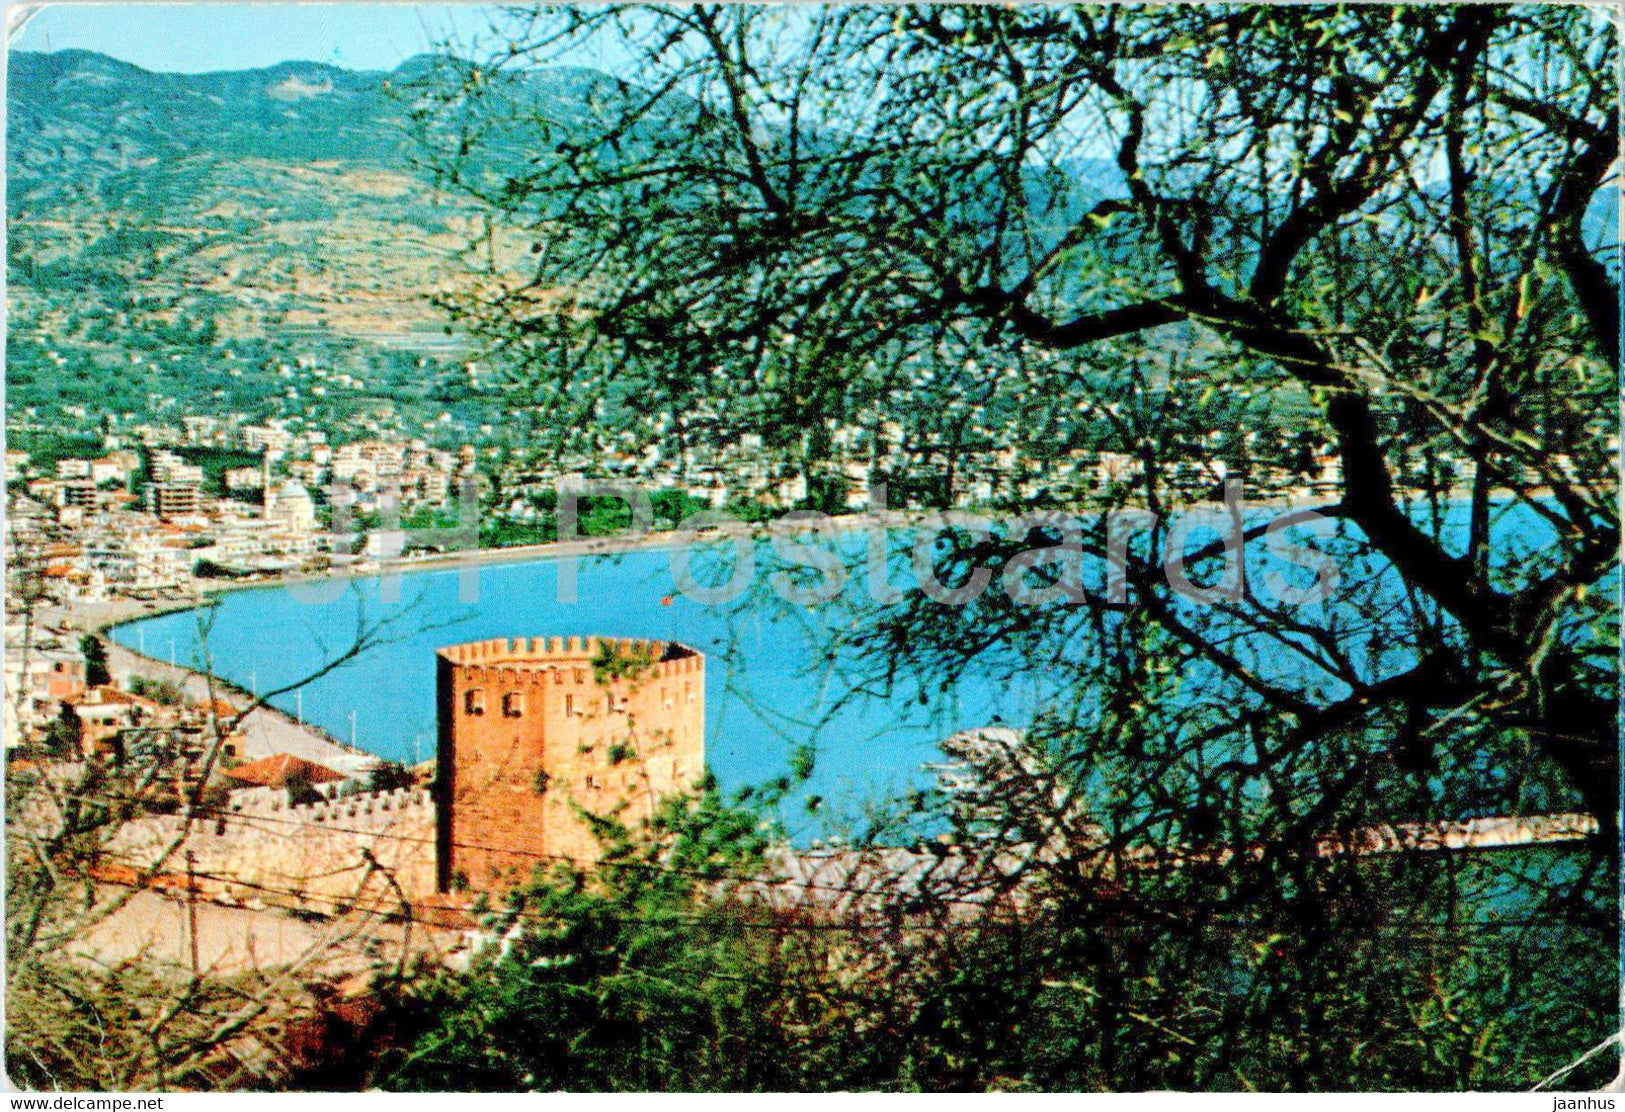 Alanya - Kaleden Sehre bir bakis - A view from the castle to the city - 1 - 1983 - Turkey - used - JH Postcards